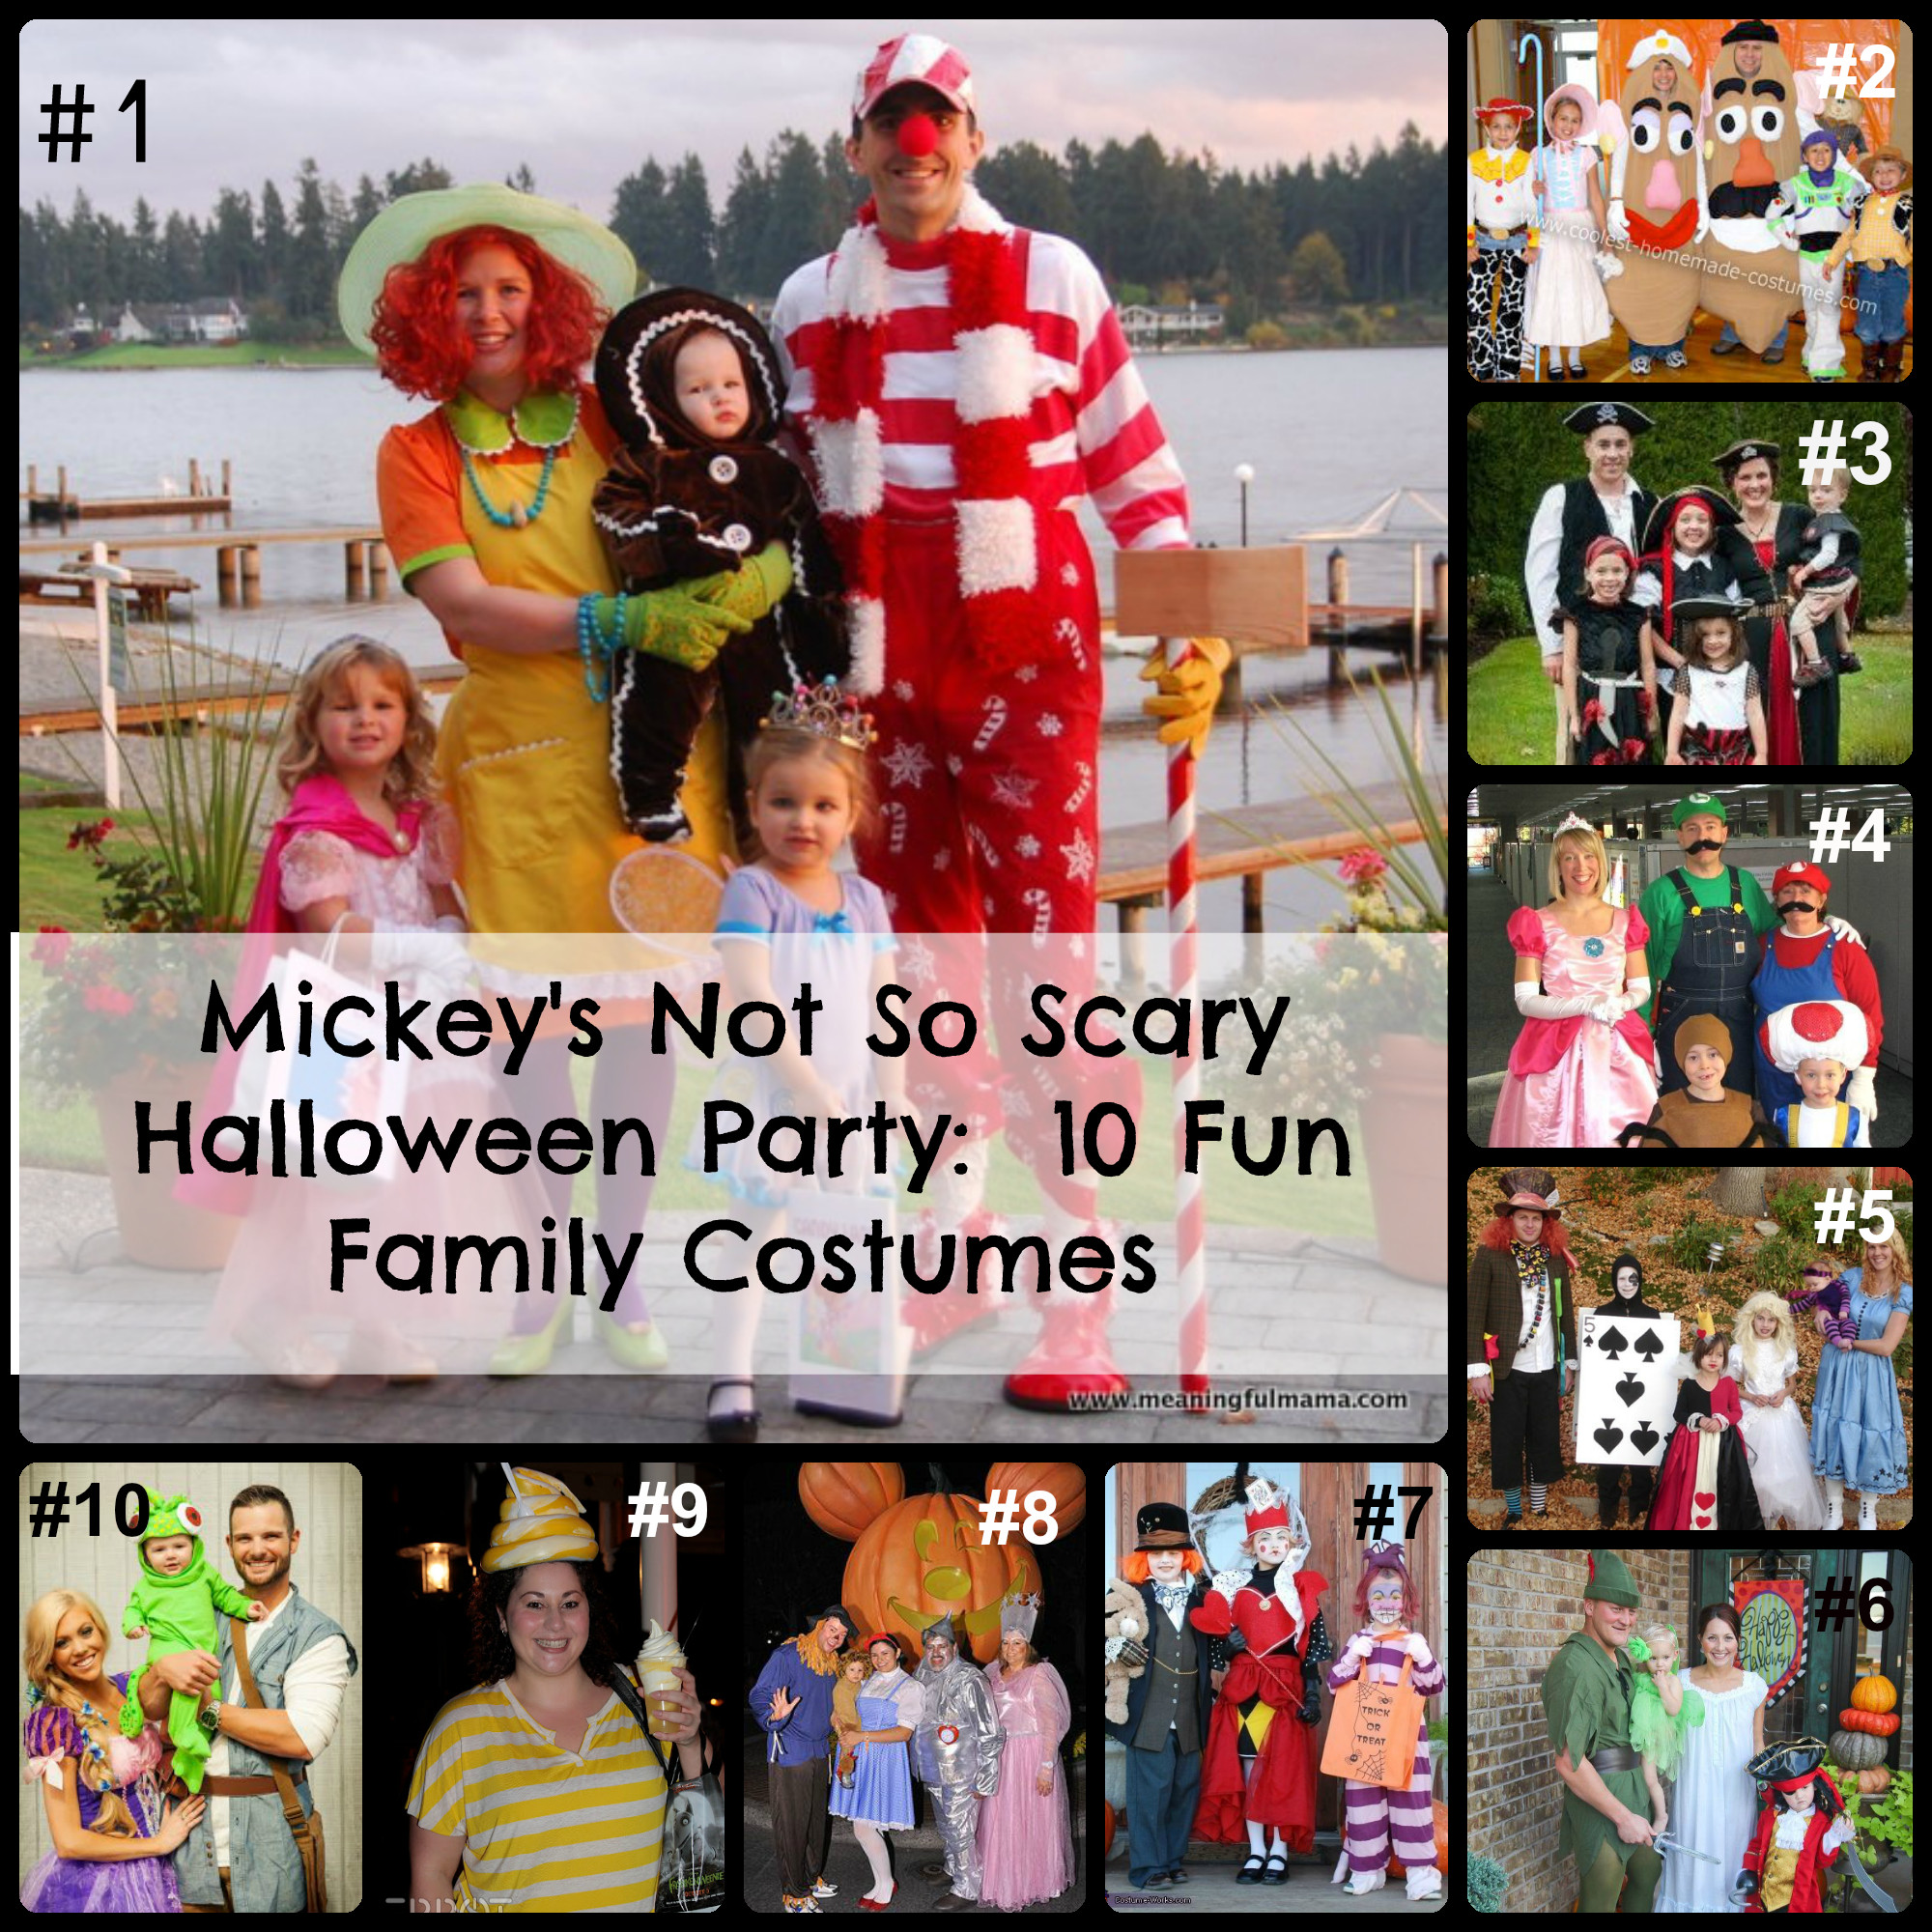 Disney Halloween Party Costume Ideas
 Mickey’s Not So Scary Halloween Party is one of the most